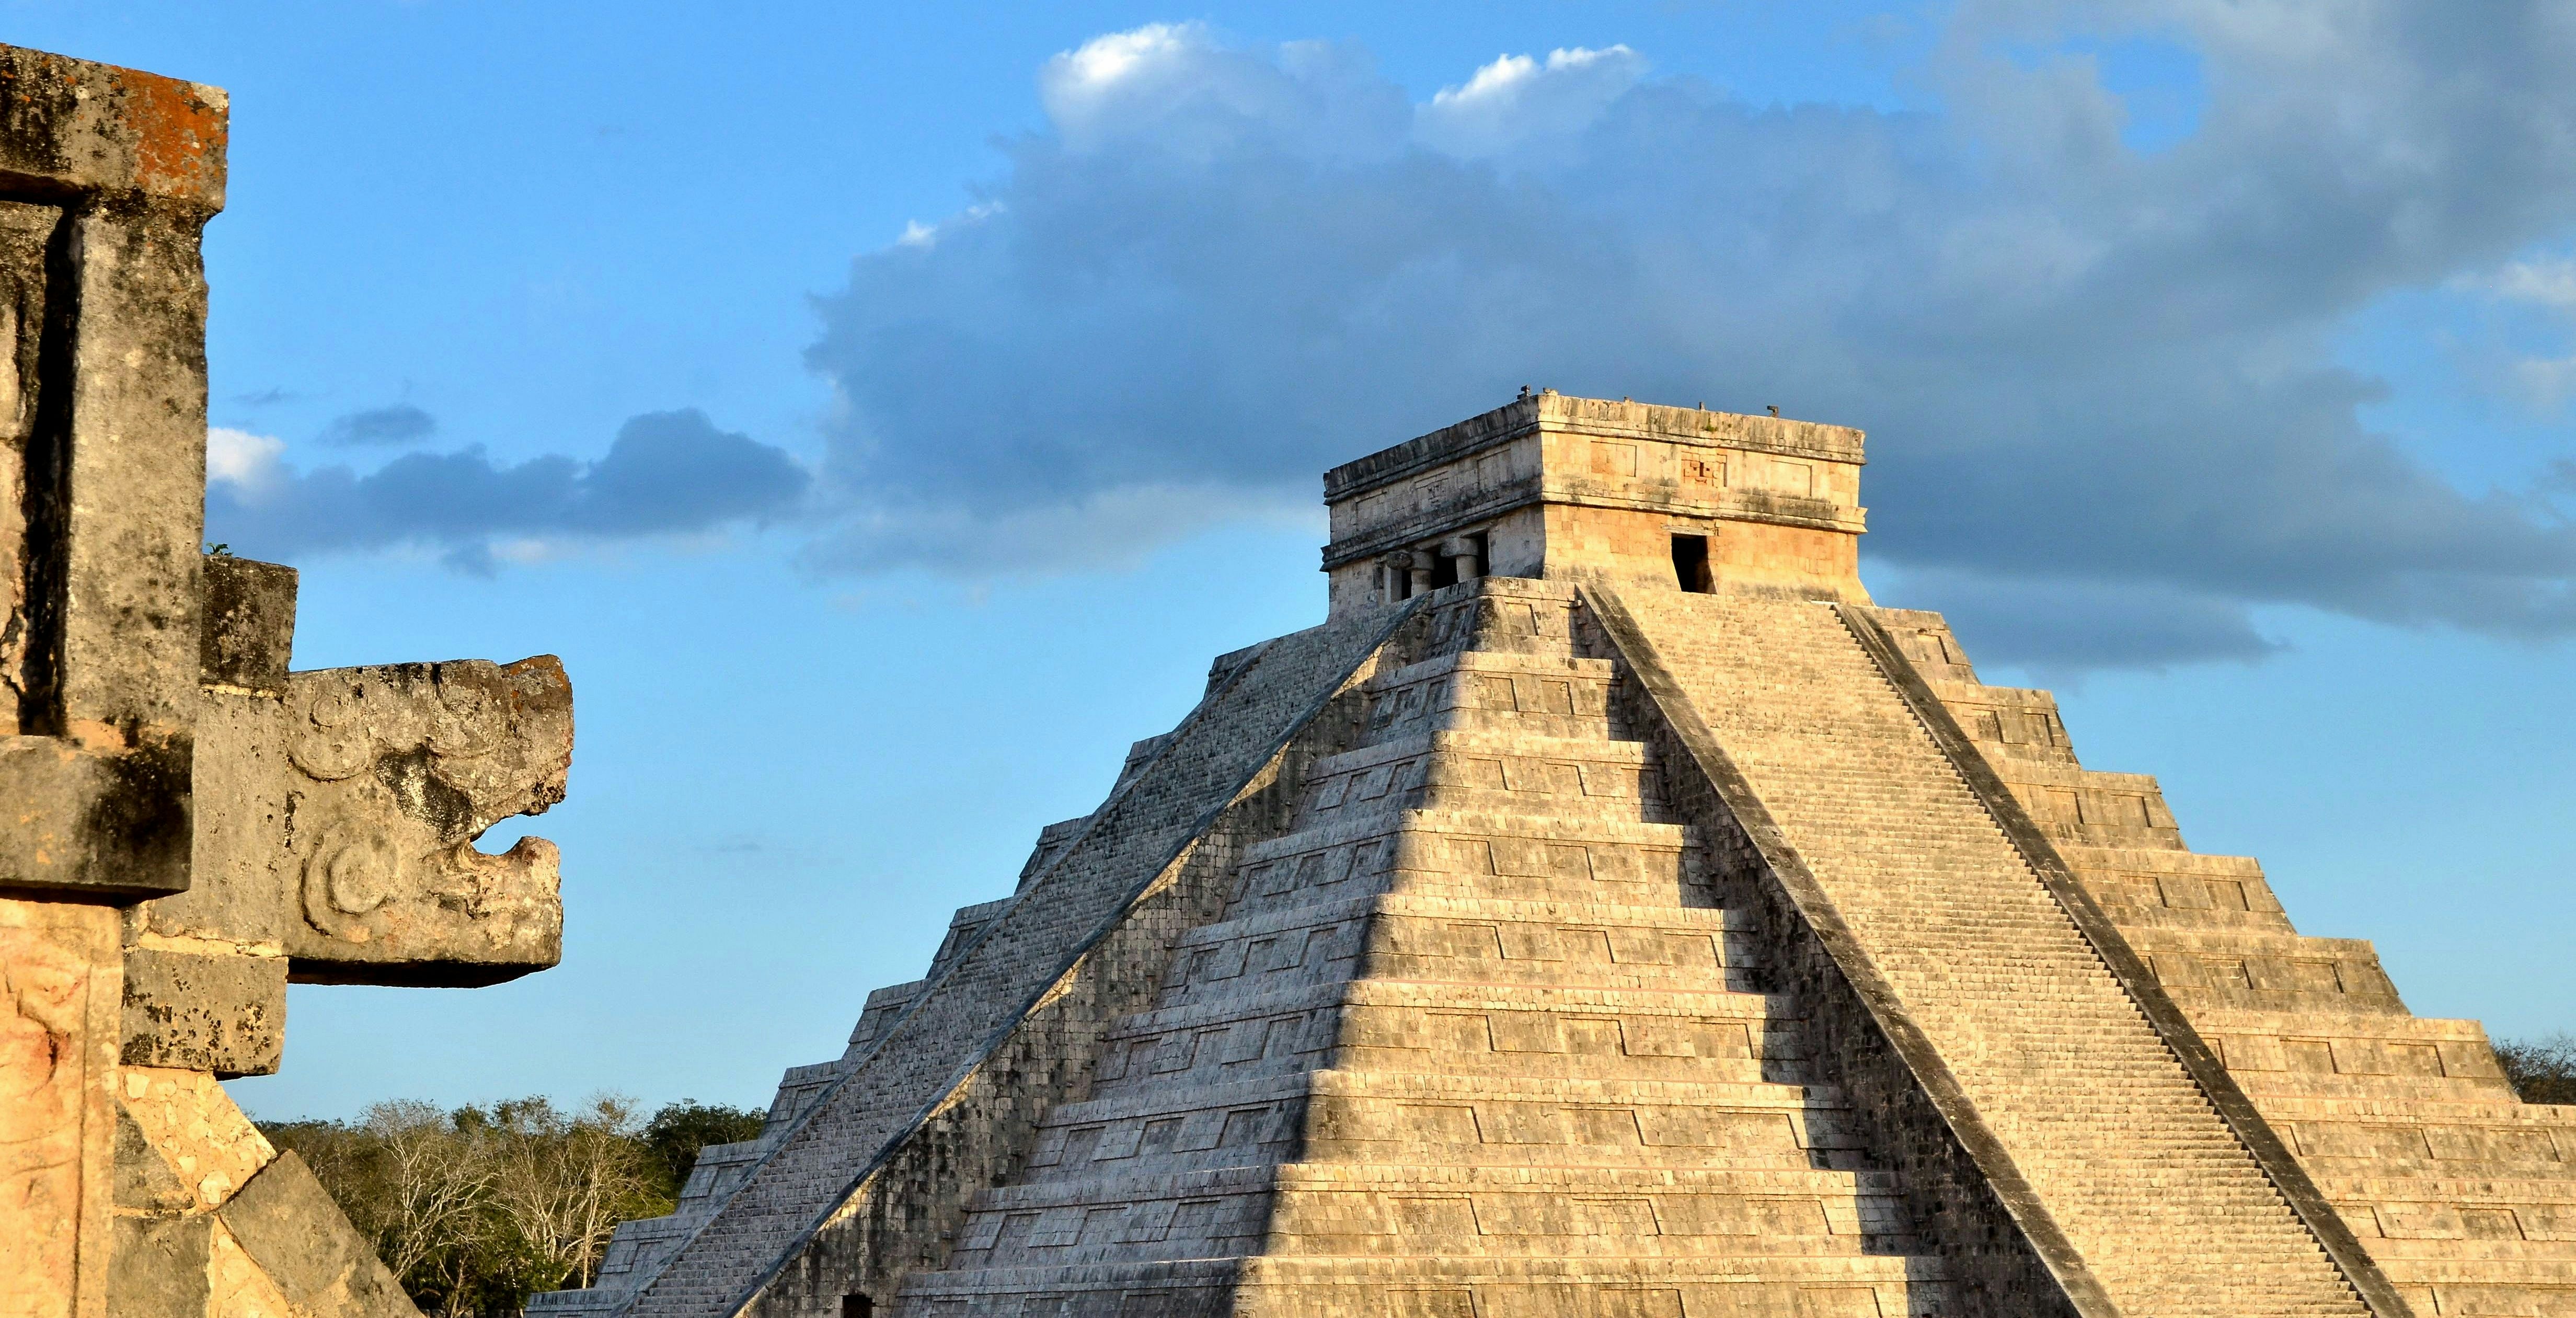 A large stone snake head faces towards the large stone temple of El Castillo in Mexico 